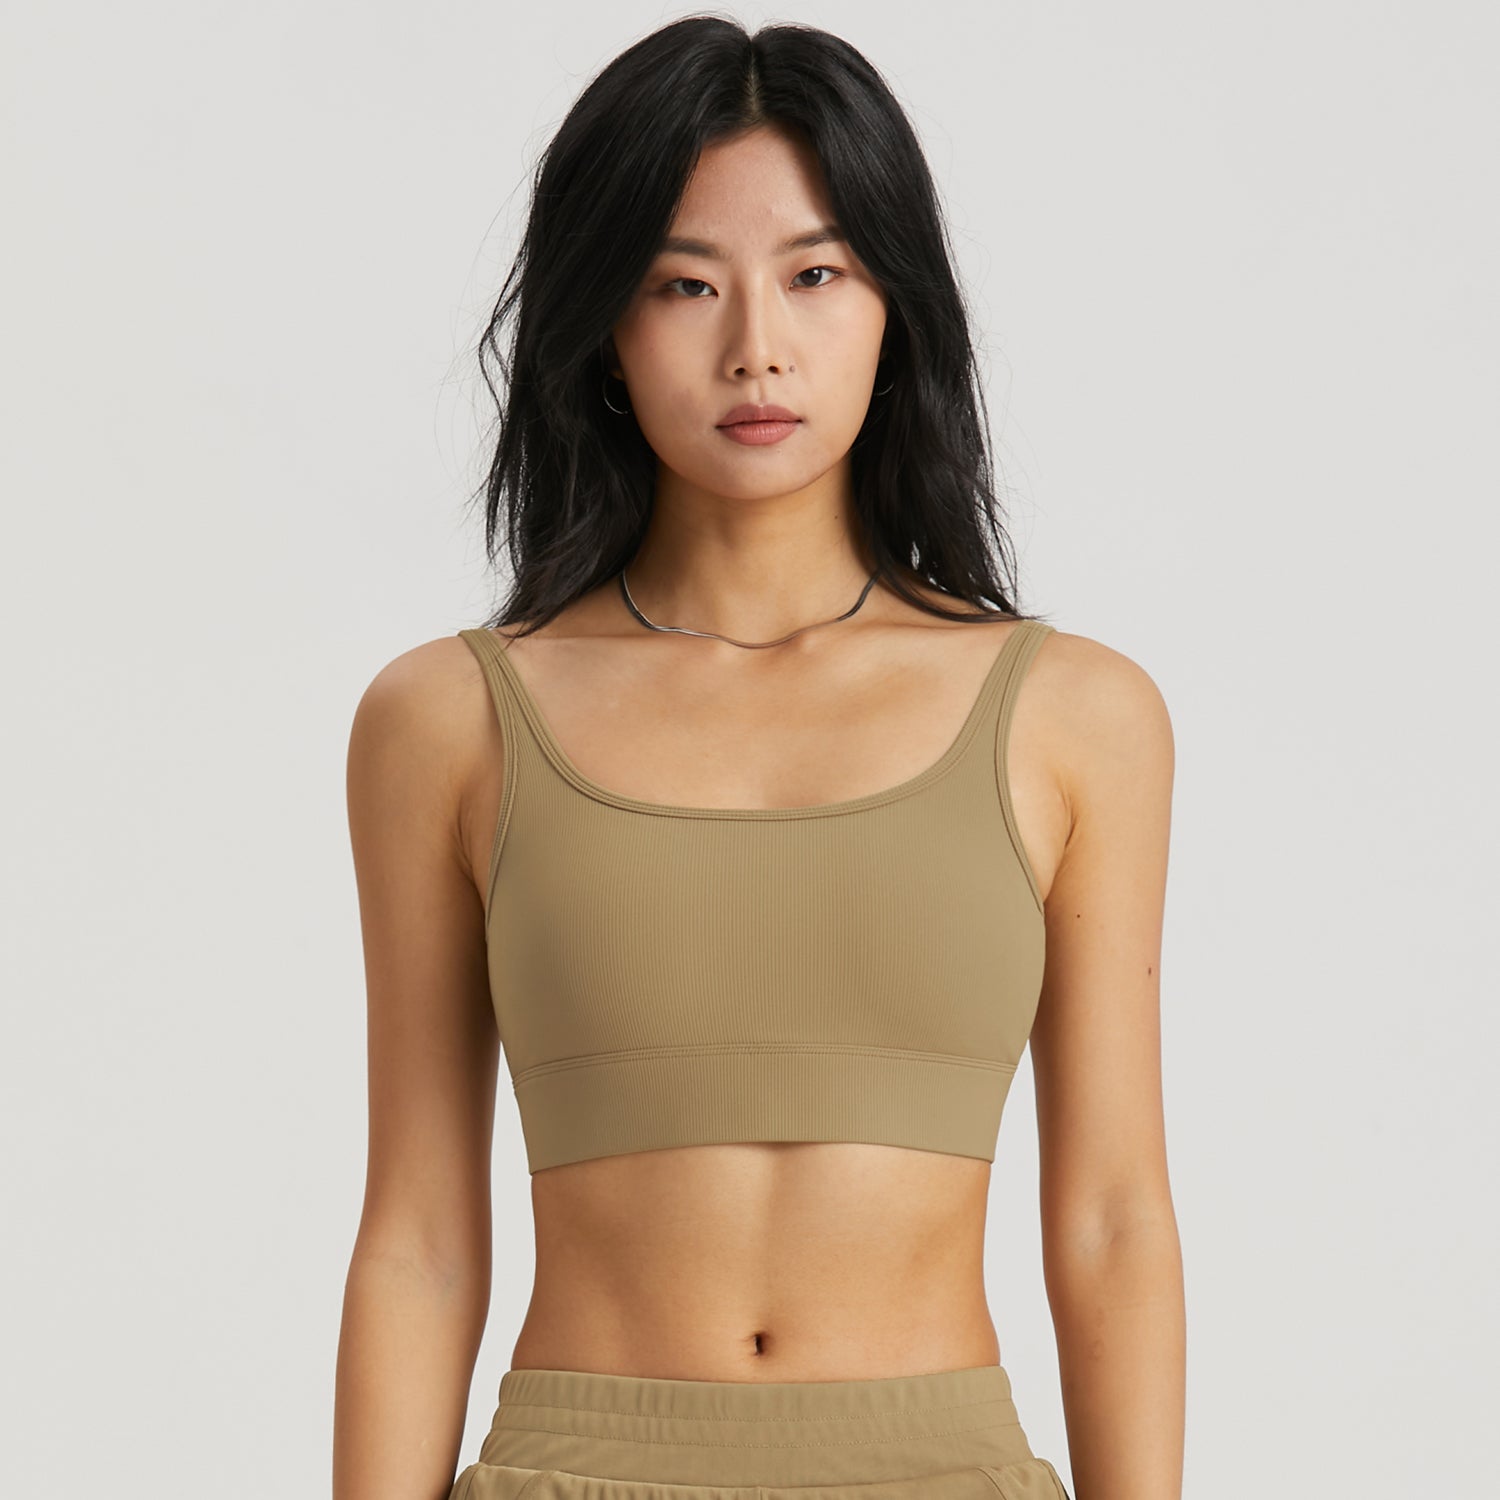 This women's supper comfortable mesh yoga shorts & super soft sports bra sets is made out of fabric that is durable, quick-dry and has great stretchable abilities giving you a comfortable and flexible feeling.  